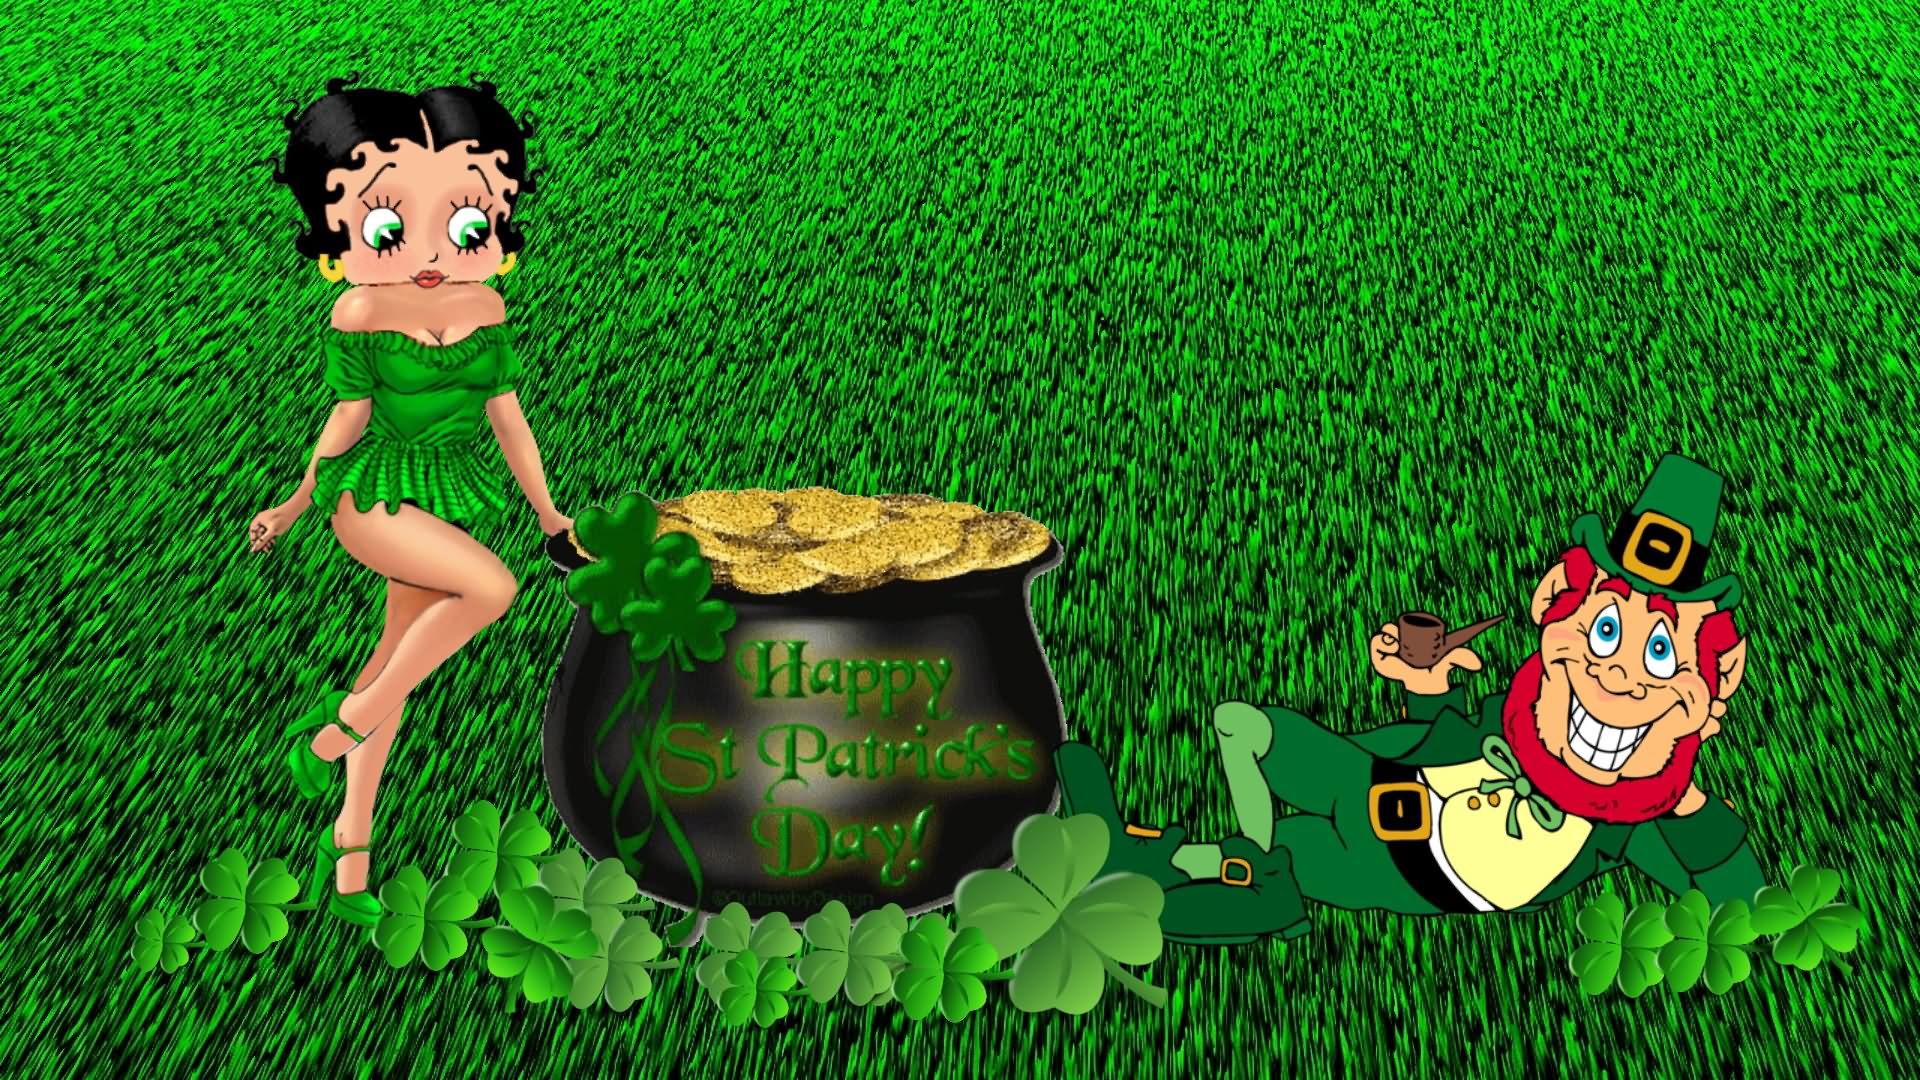 Betty Boop Wishes You Happy Saint Patrick's Day HD Wallpaper